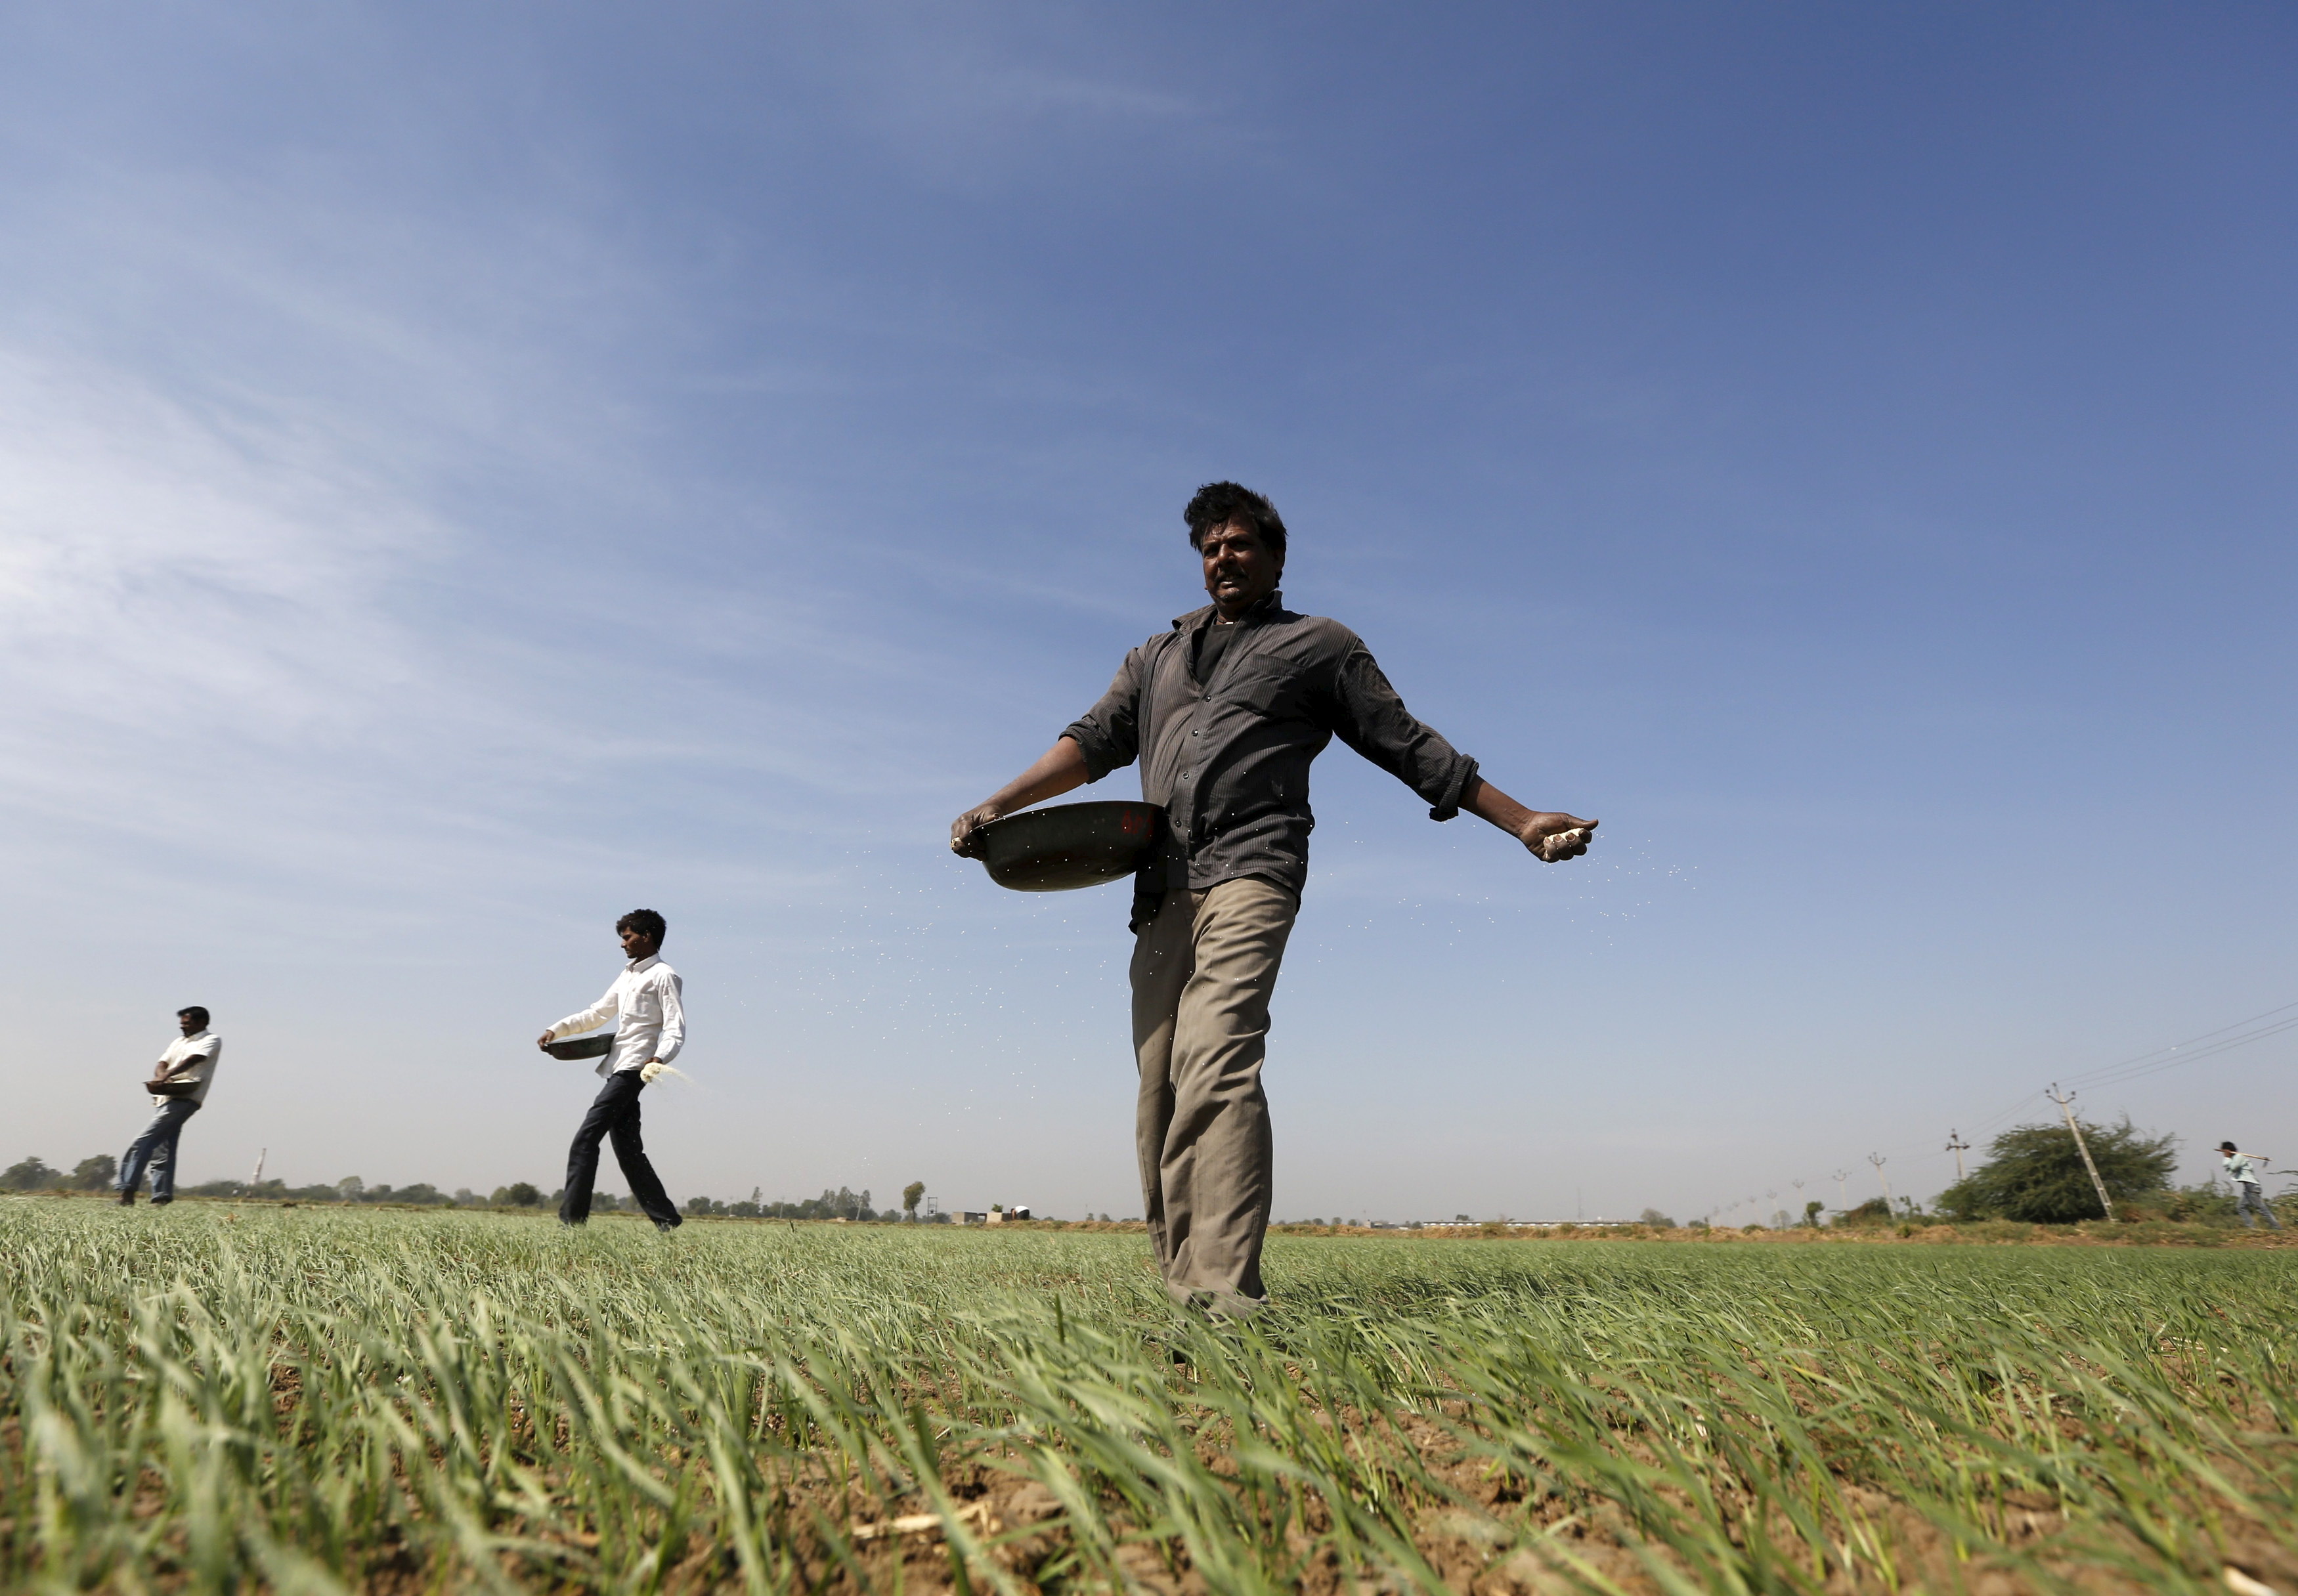 Farmers sprinkle fertilizer on a wheat field on the outskirts of Ahmedabad, India, December 15, 2015. REUTERS/Amit Dave